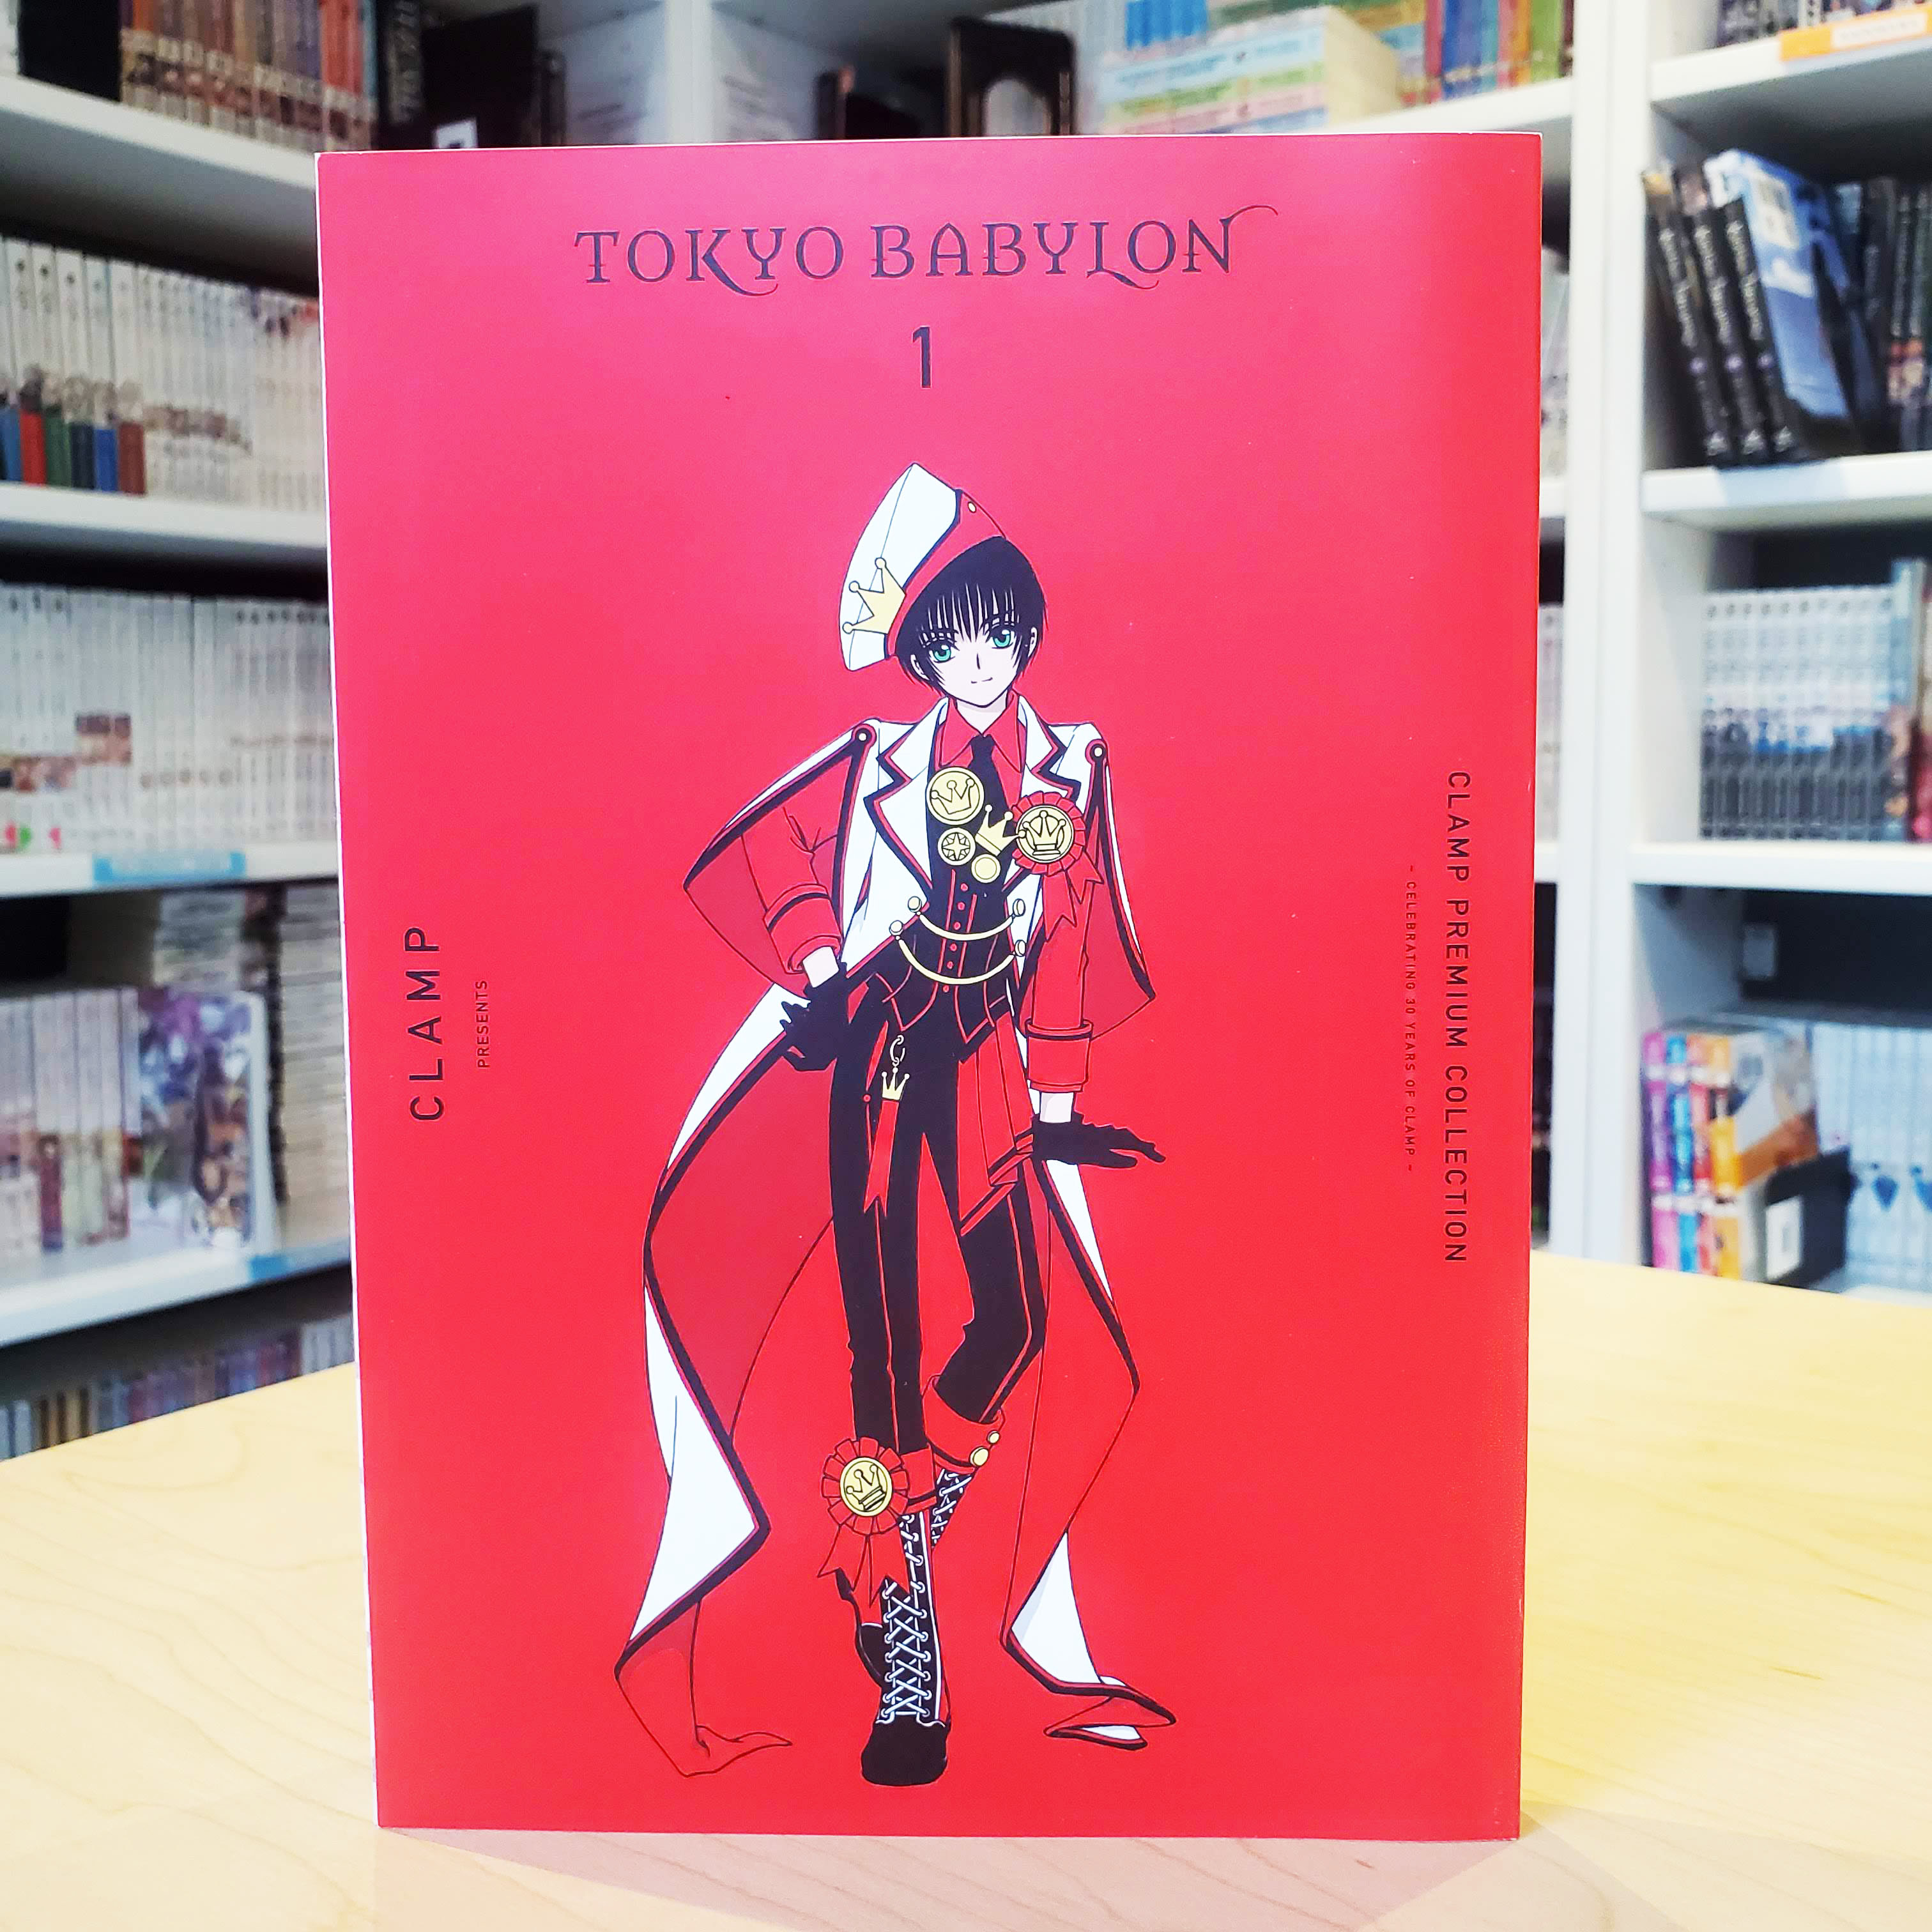 The Return of Old Friends: A History of Yen Press Rereleases